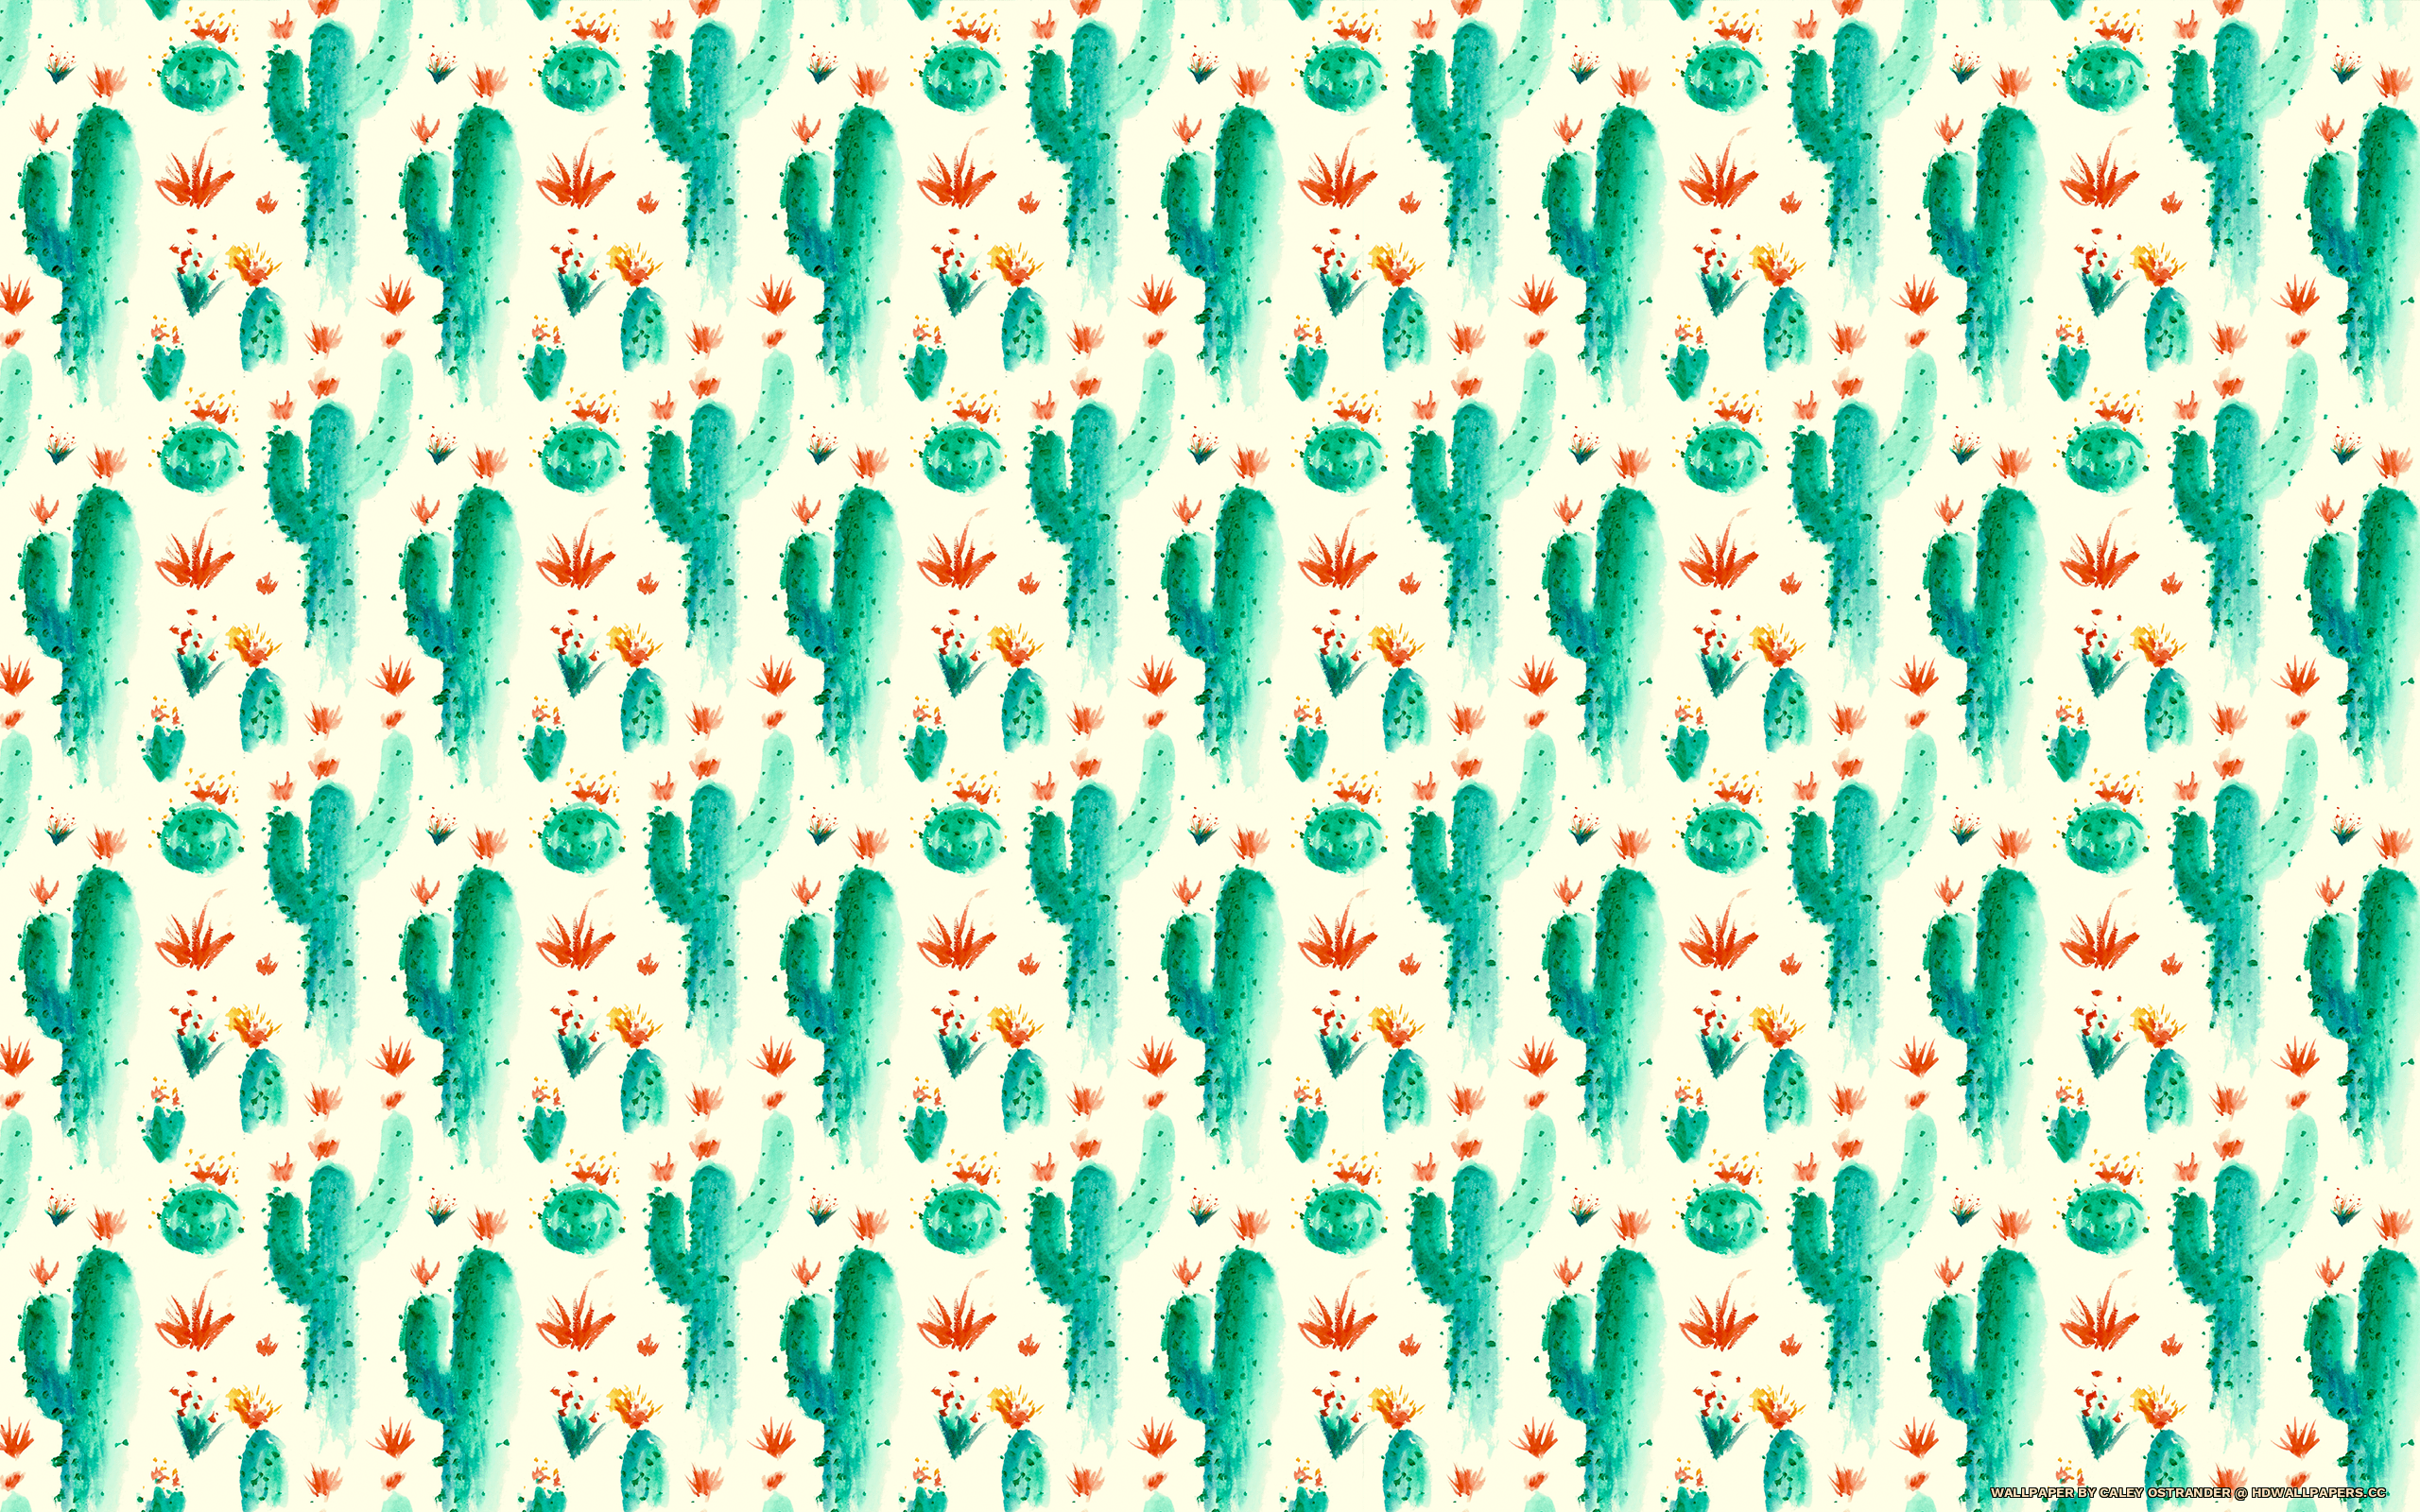 Cactus Pattern - Hd Wallpapers - Cactus Patterned Desktop Backgrounds , HD Wallpaper & Backgrounds